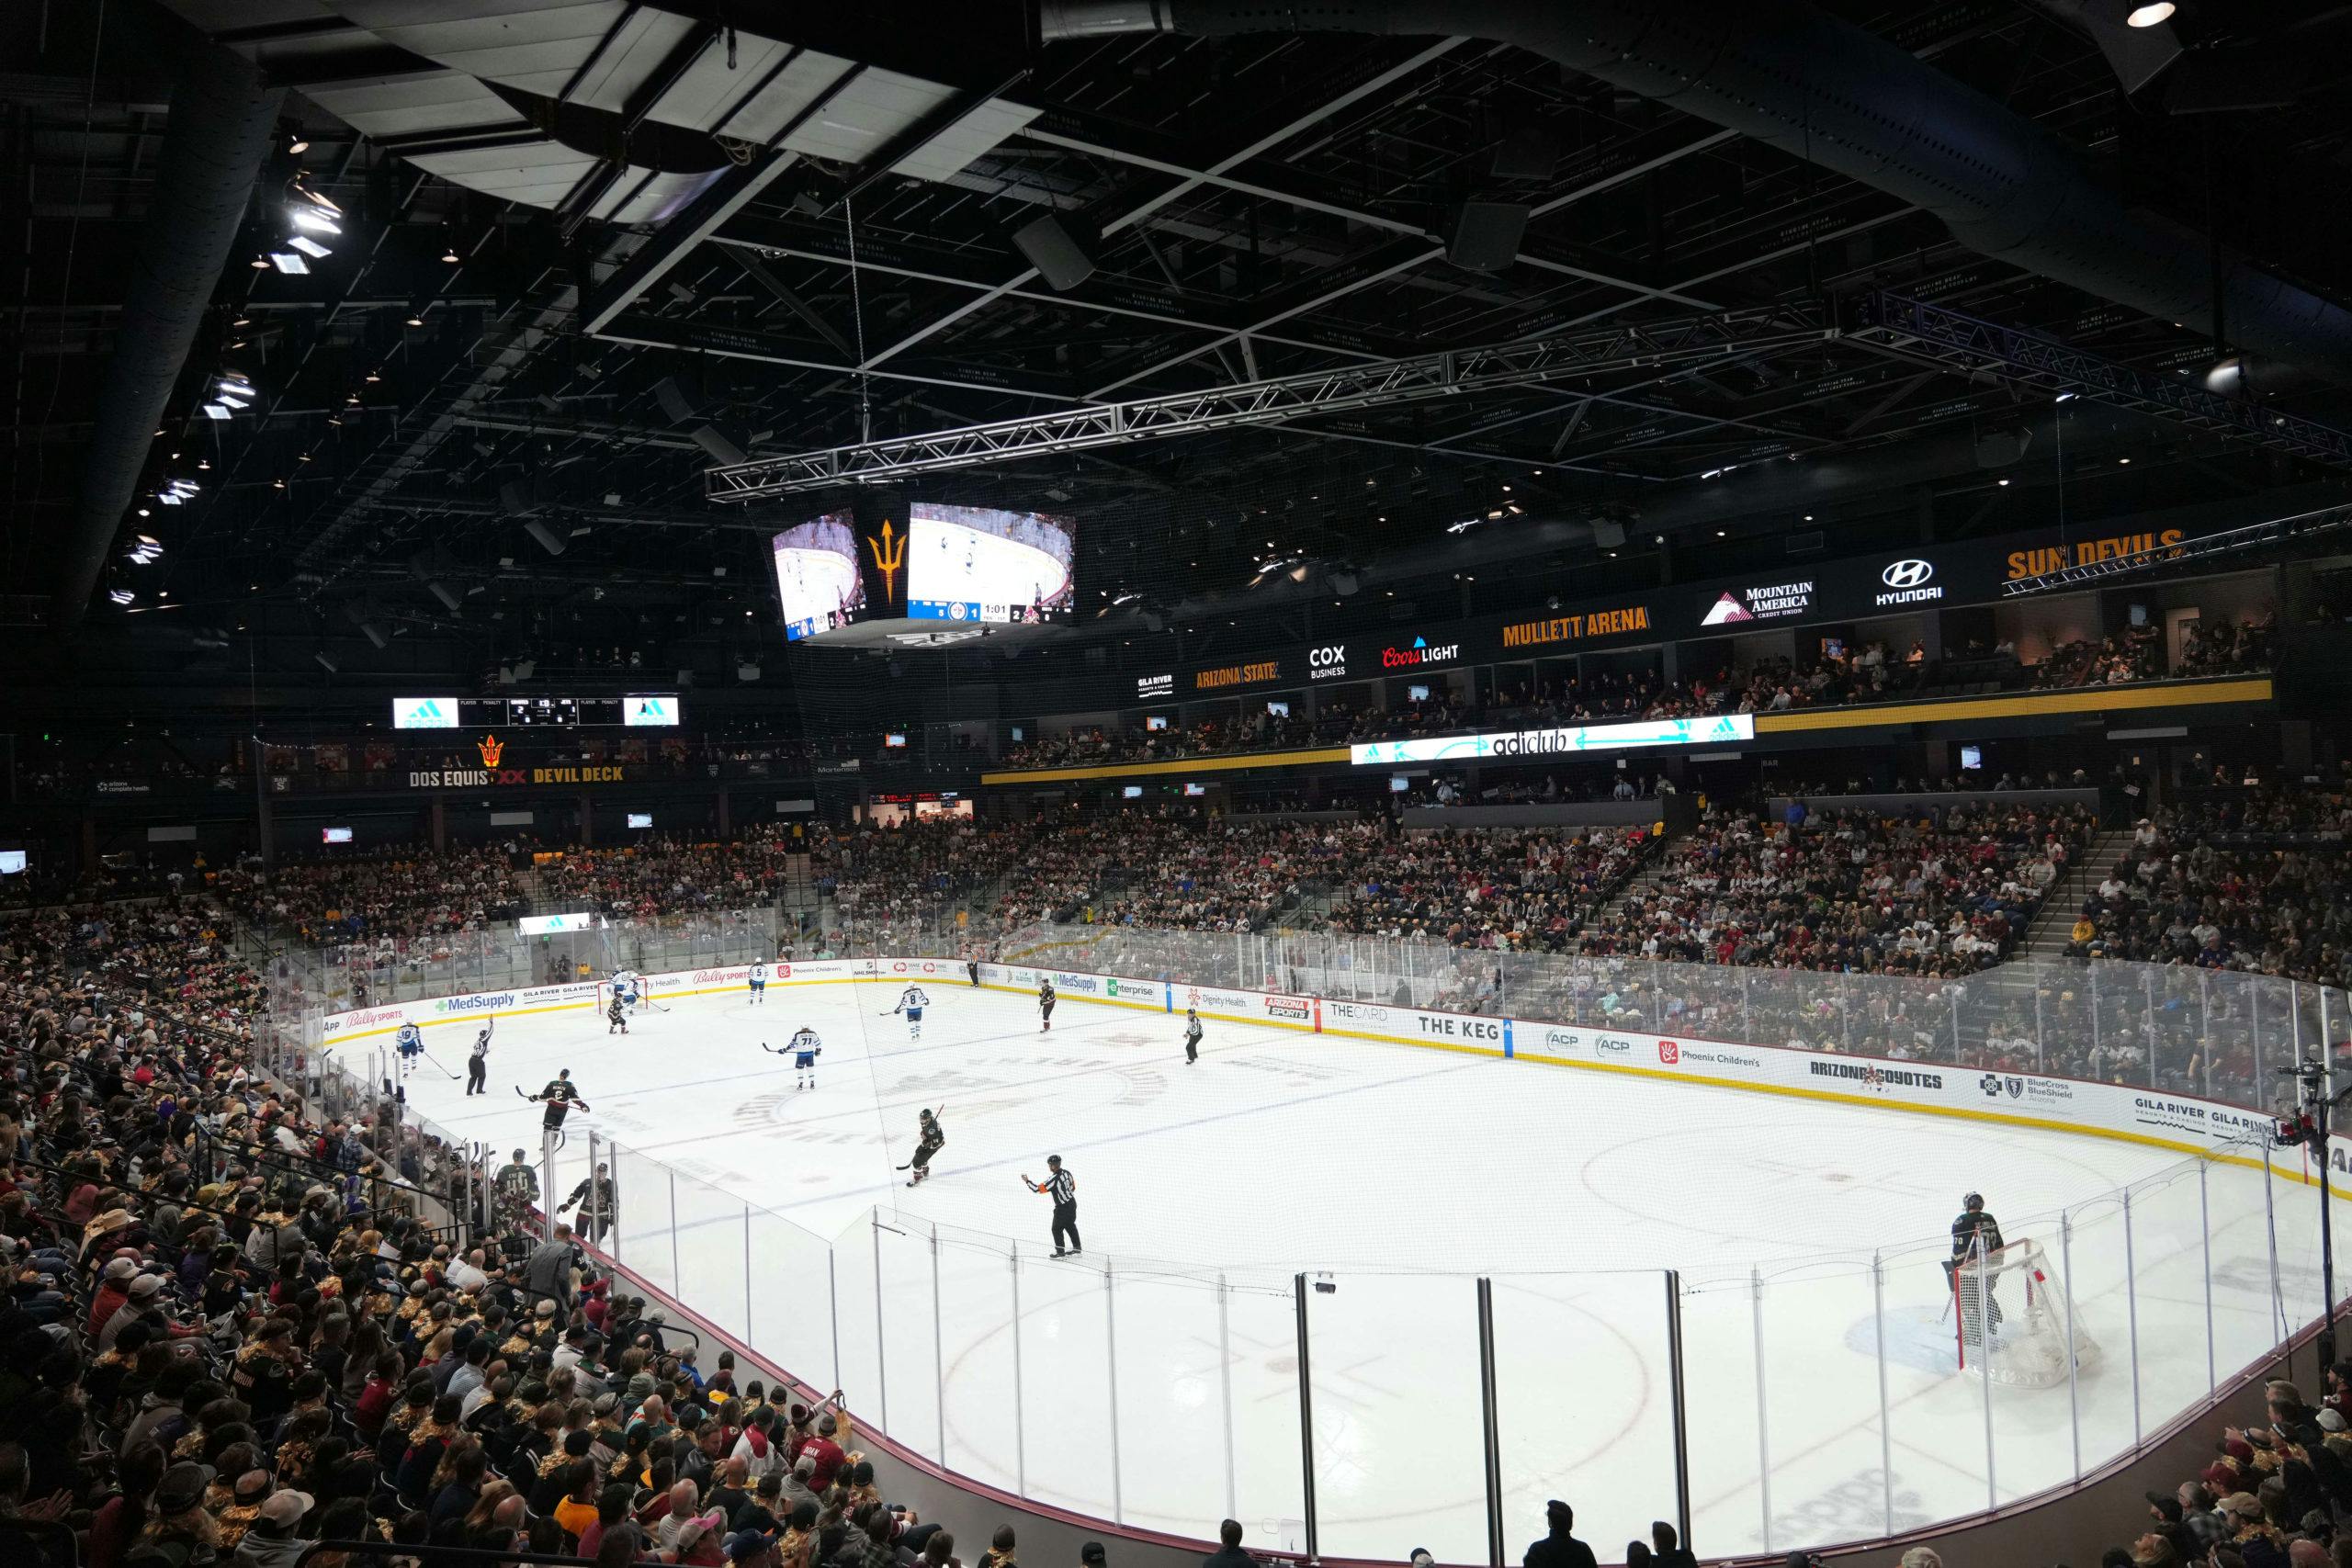 Why are the Arizona Coyotes playing in a college hockey arena?